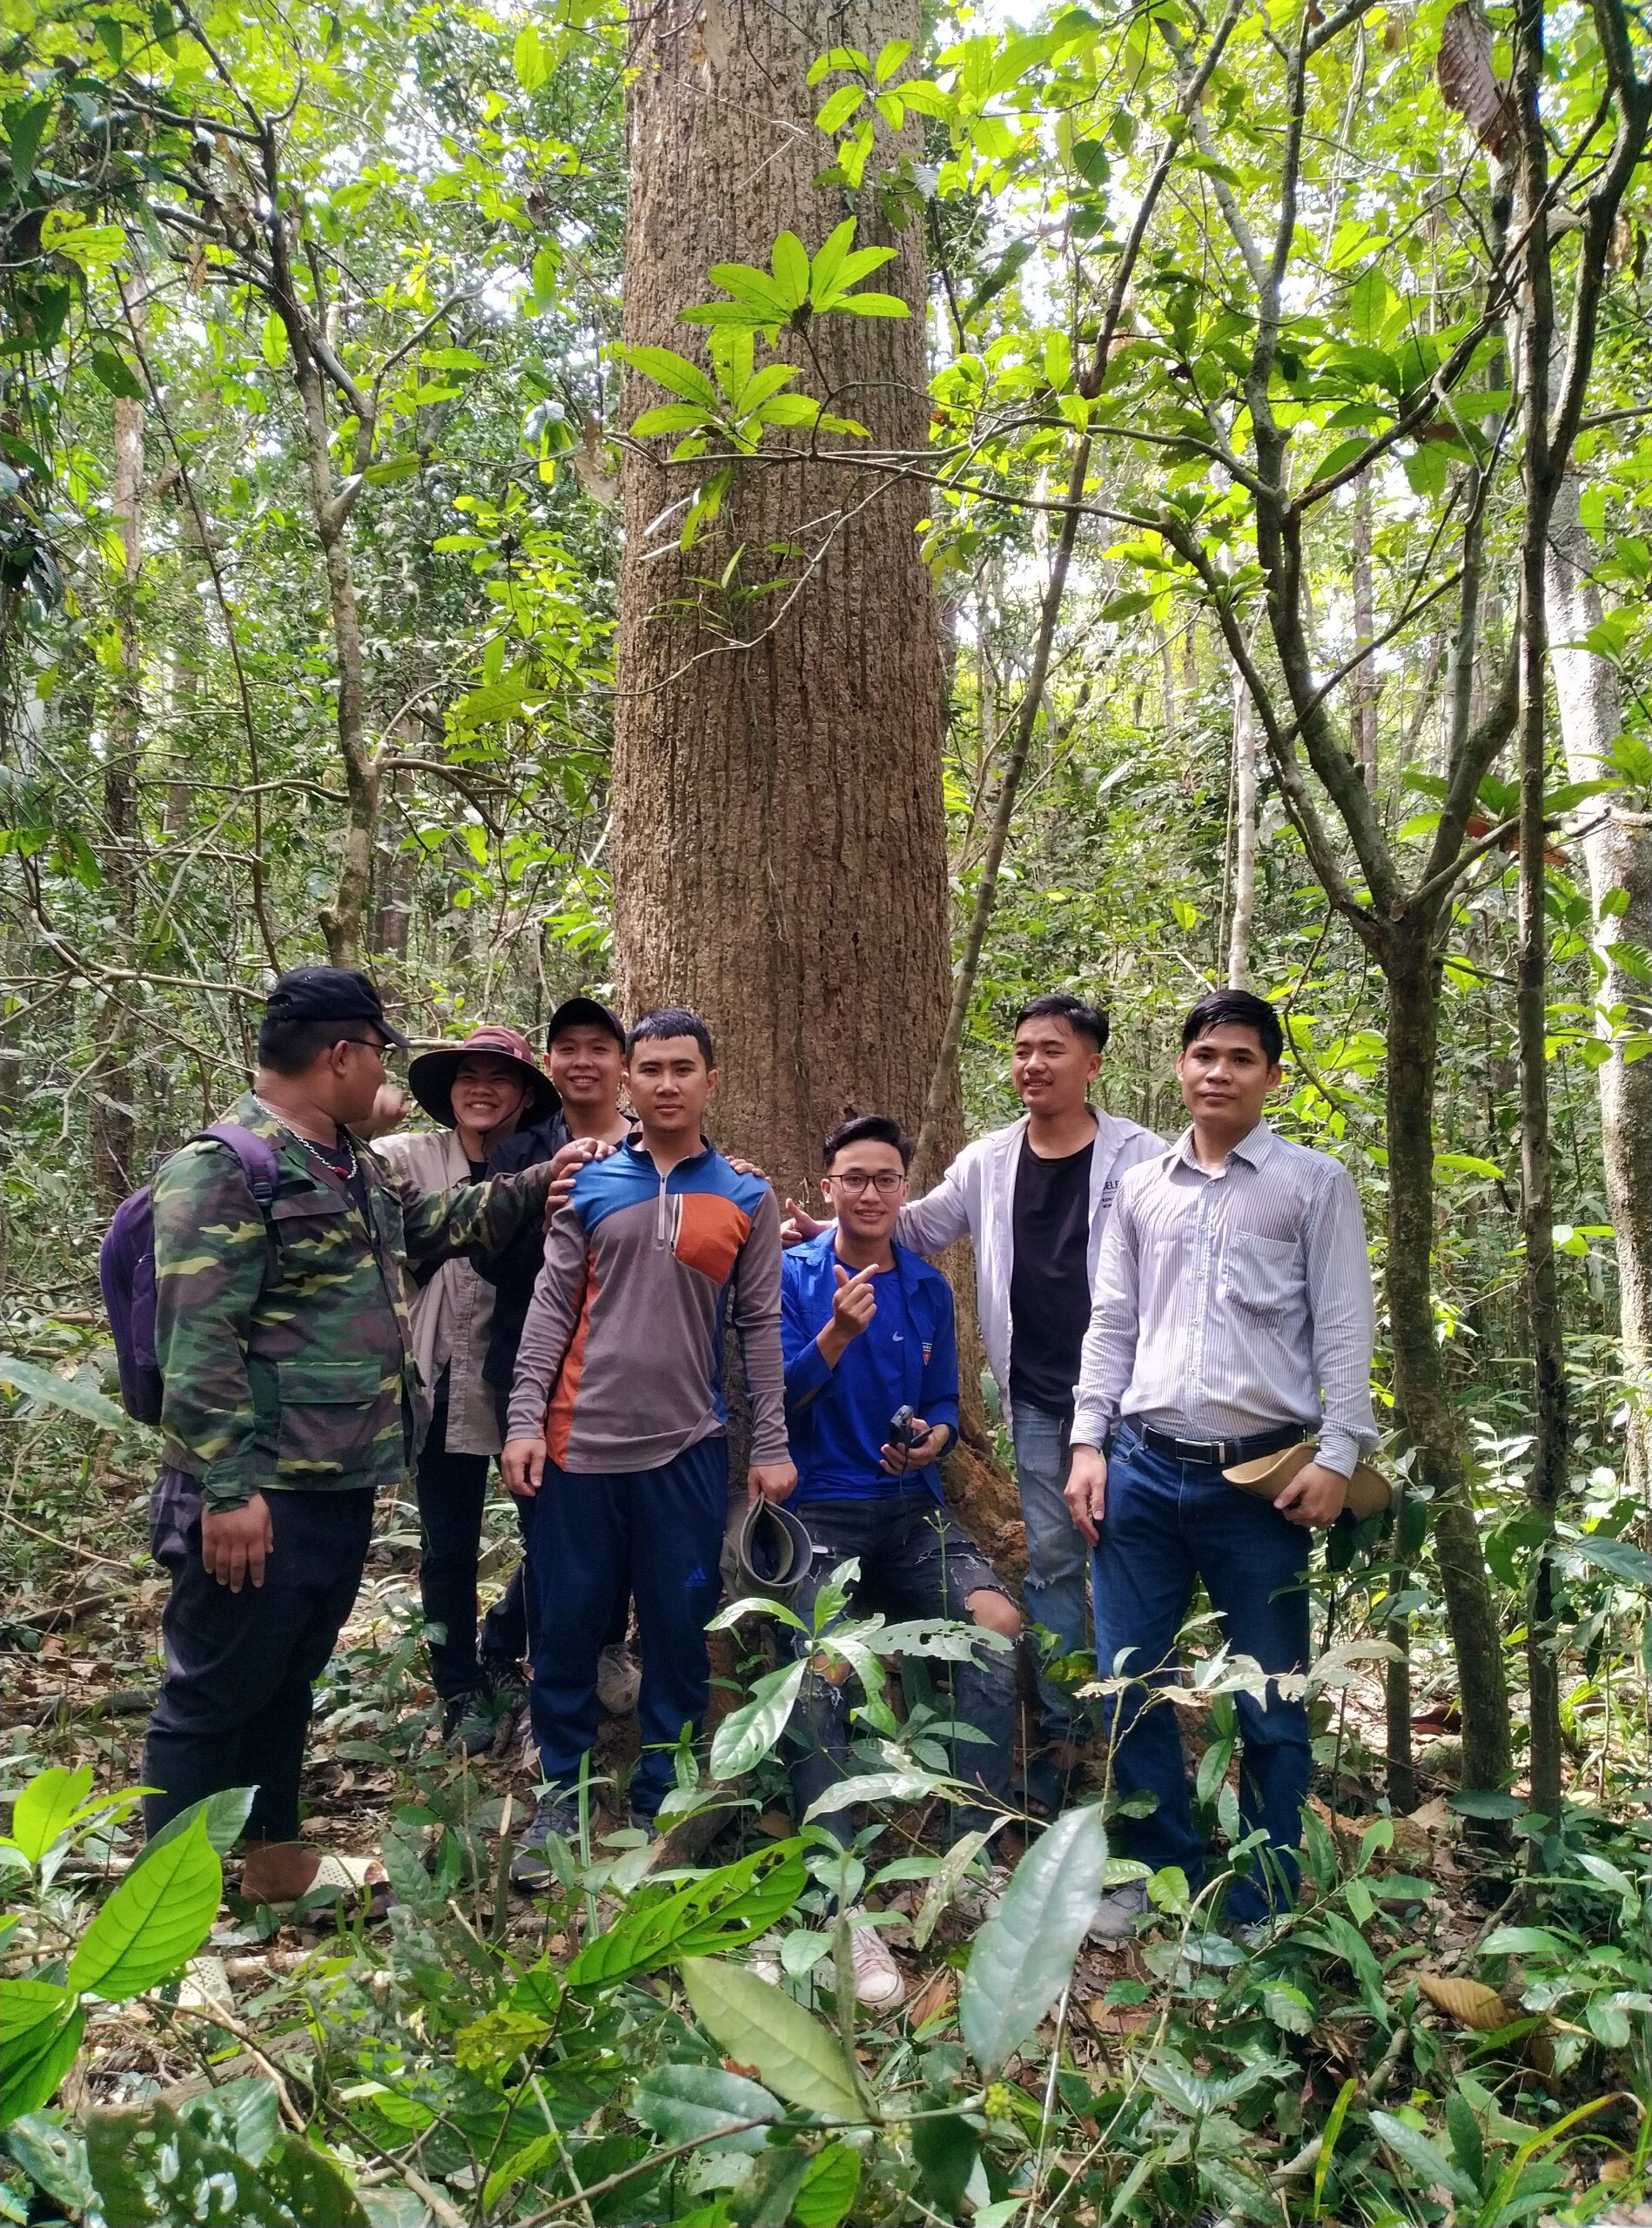 A group of men standing in front of a treeDescription automatically generated with medium confidence